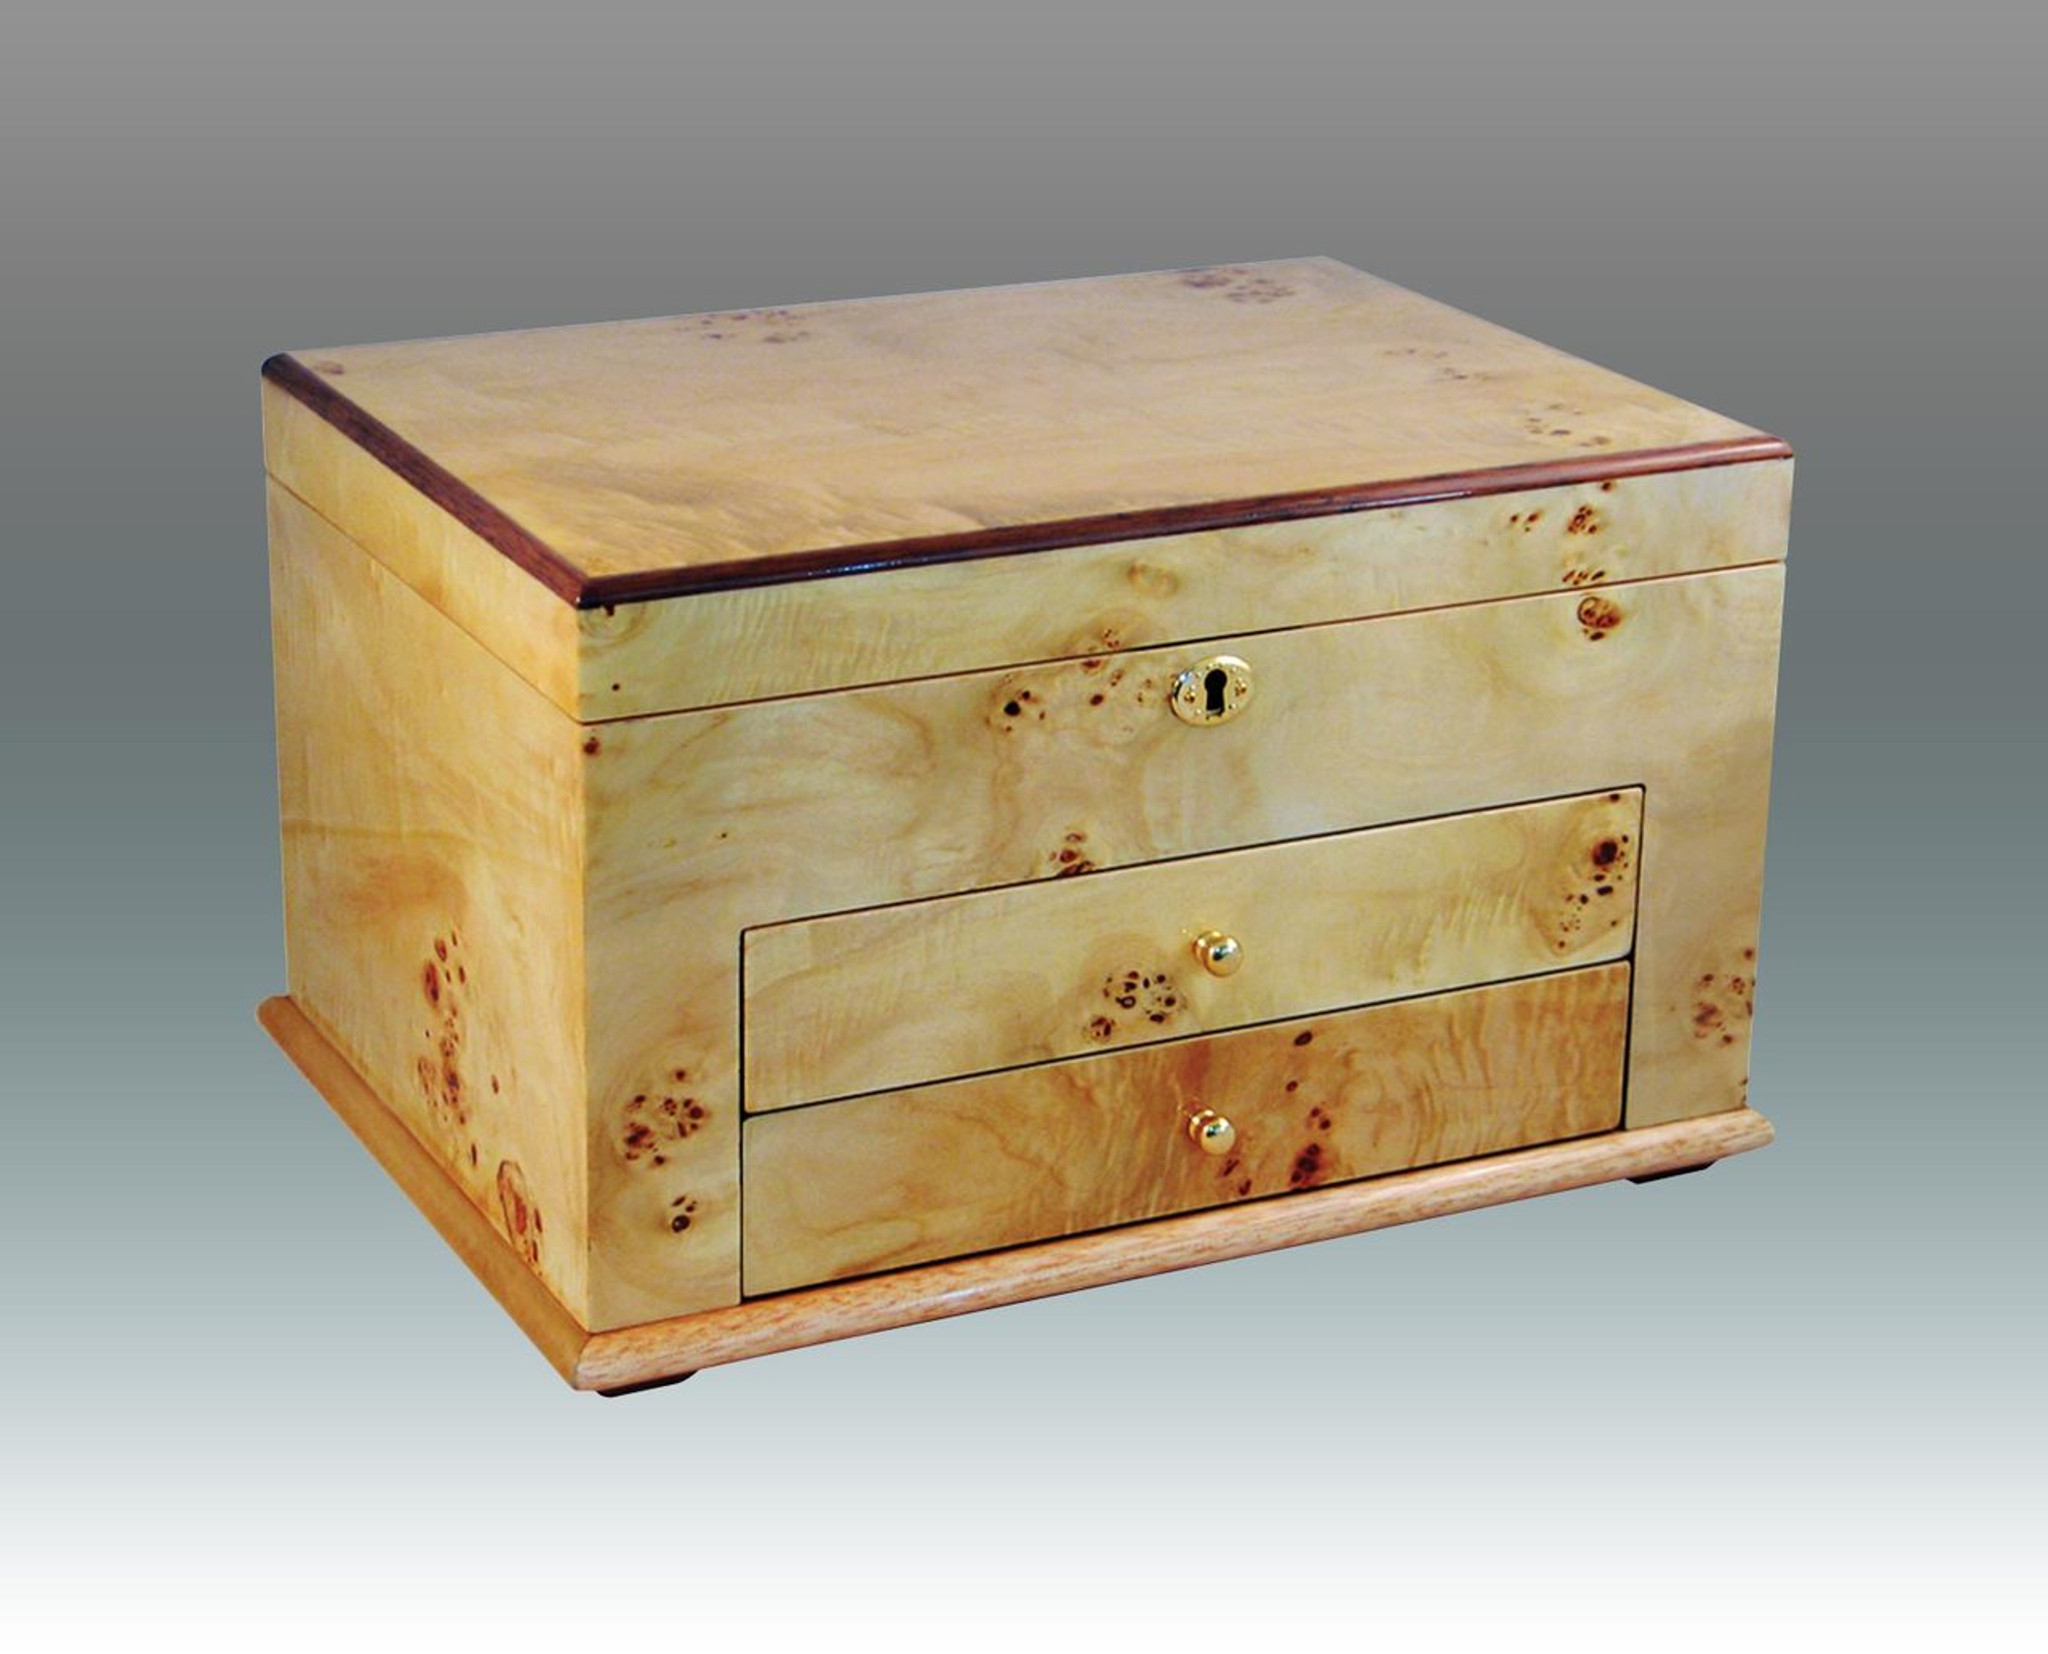 wooden storage box with drawers